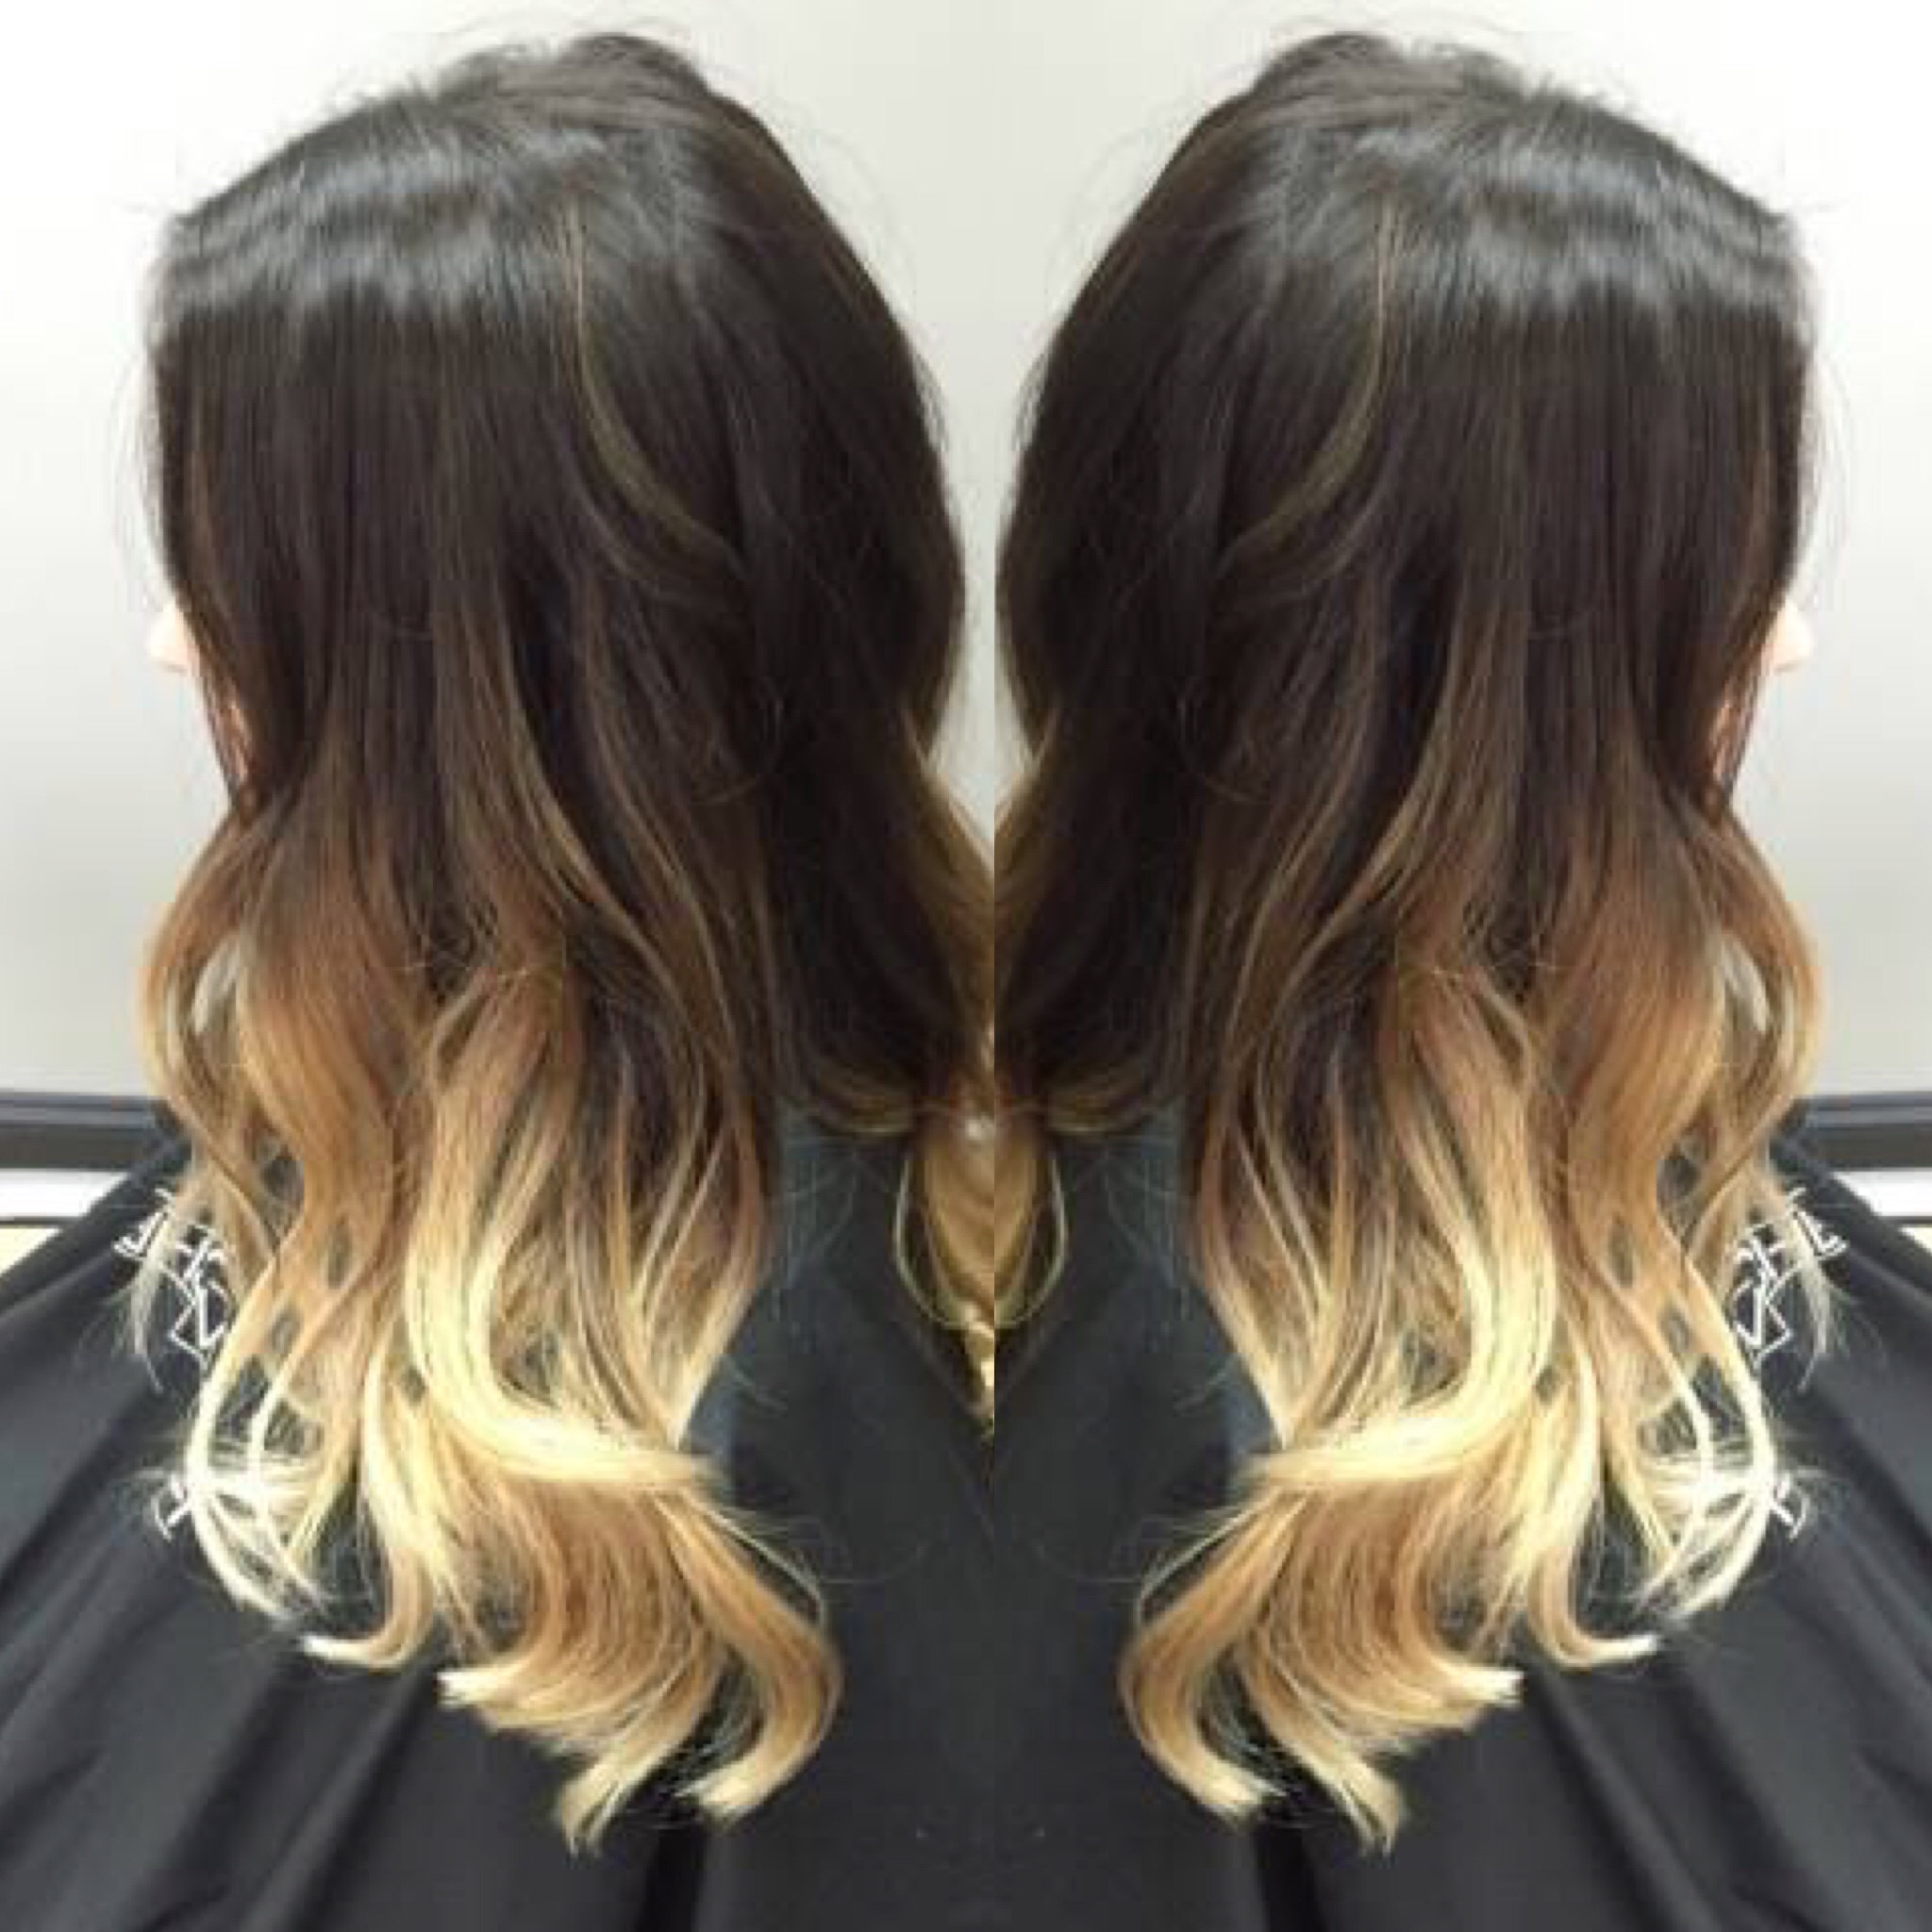 A rich brunette to blond ombre done by Ashley